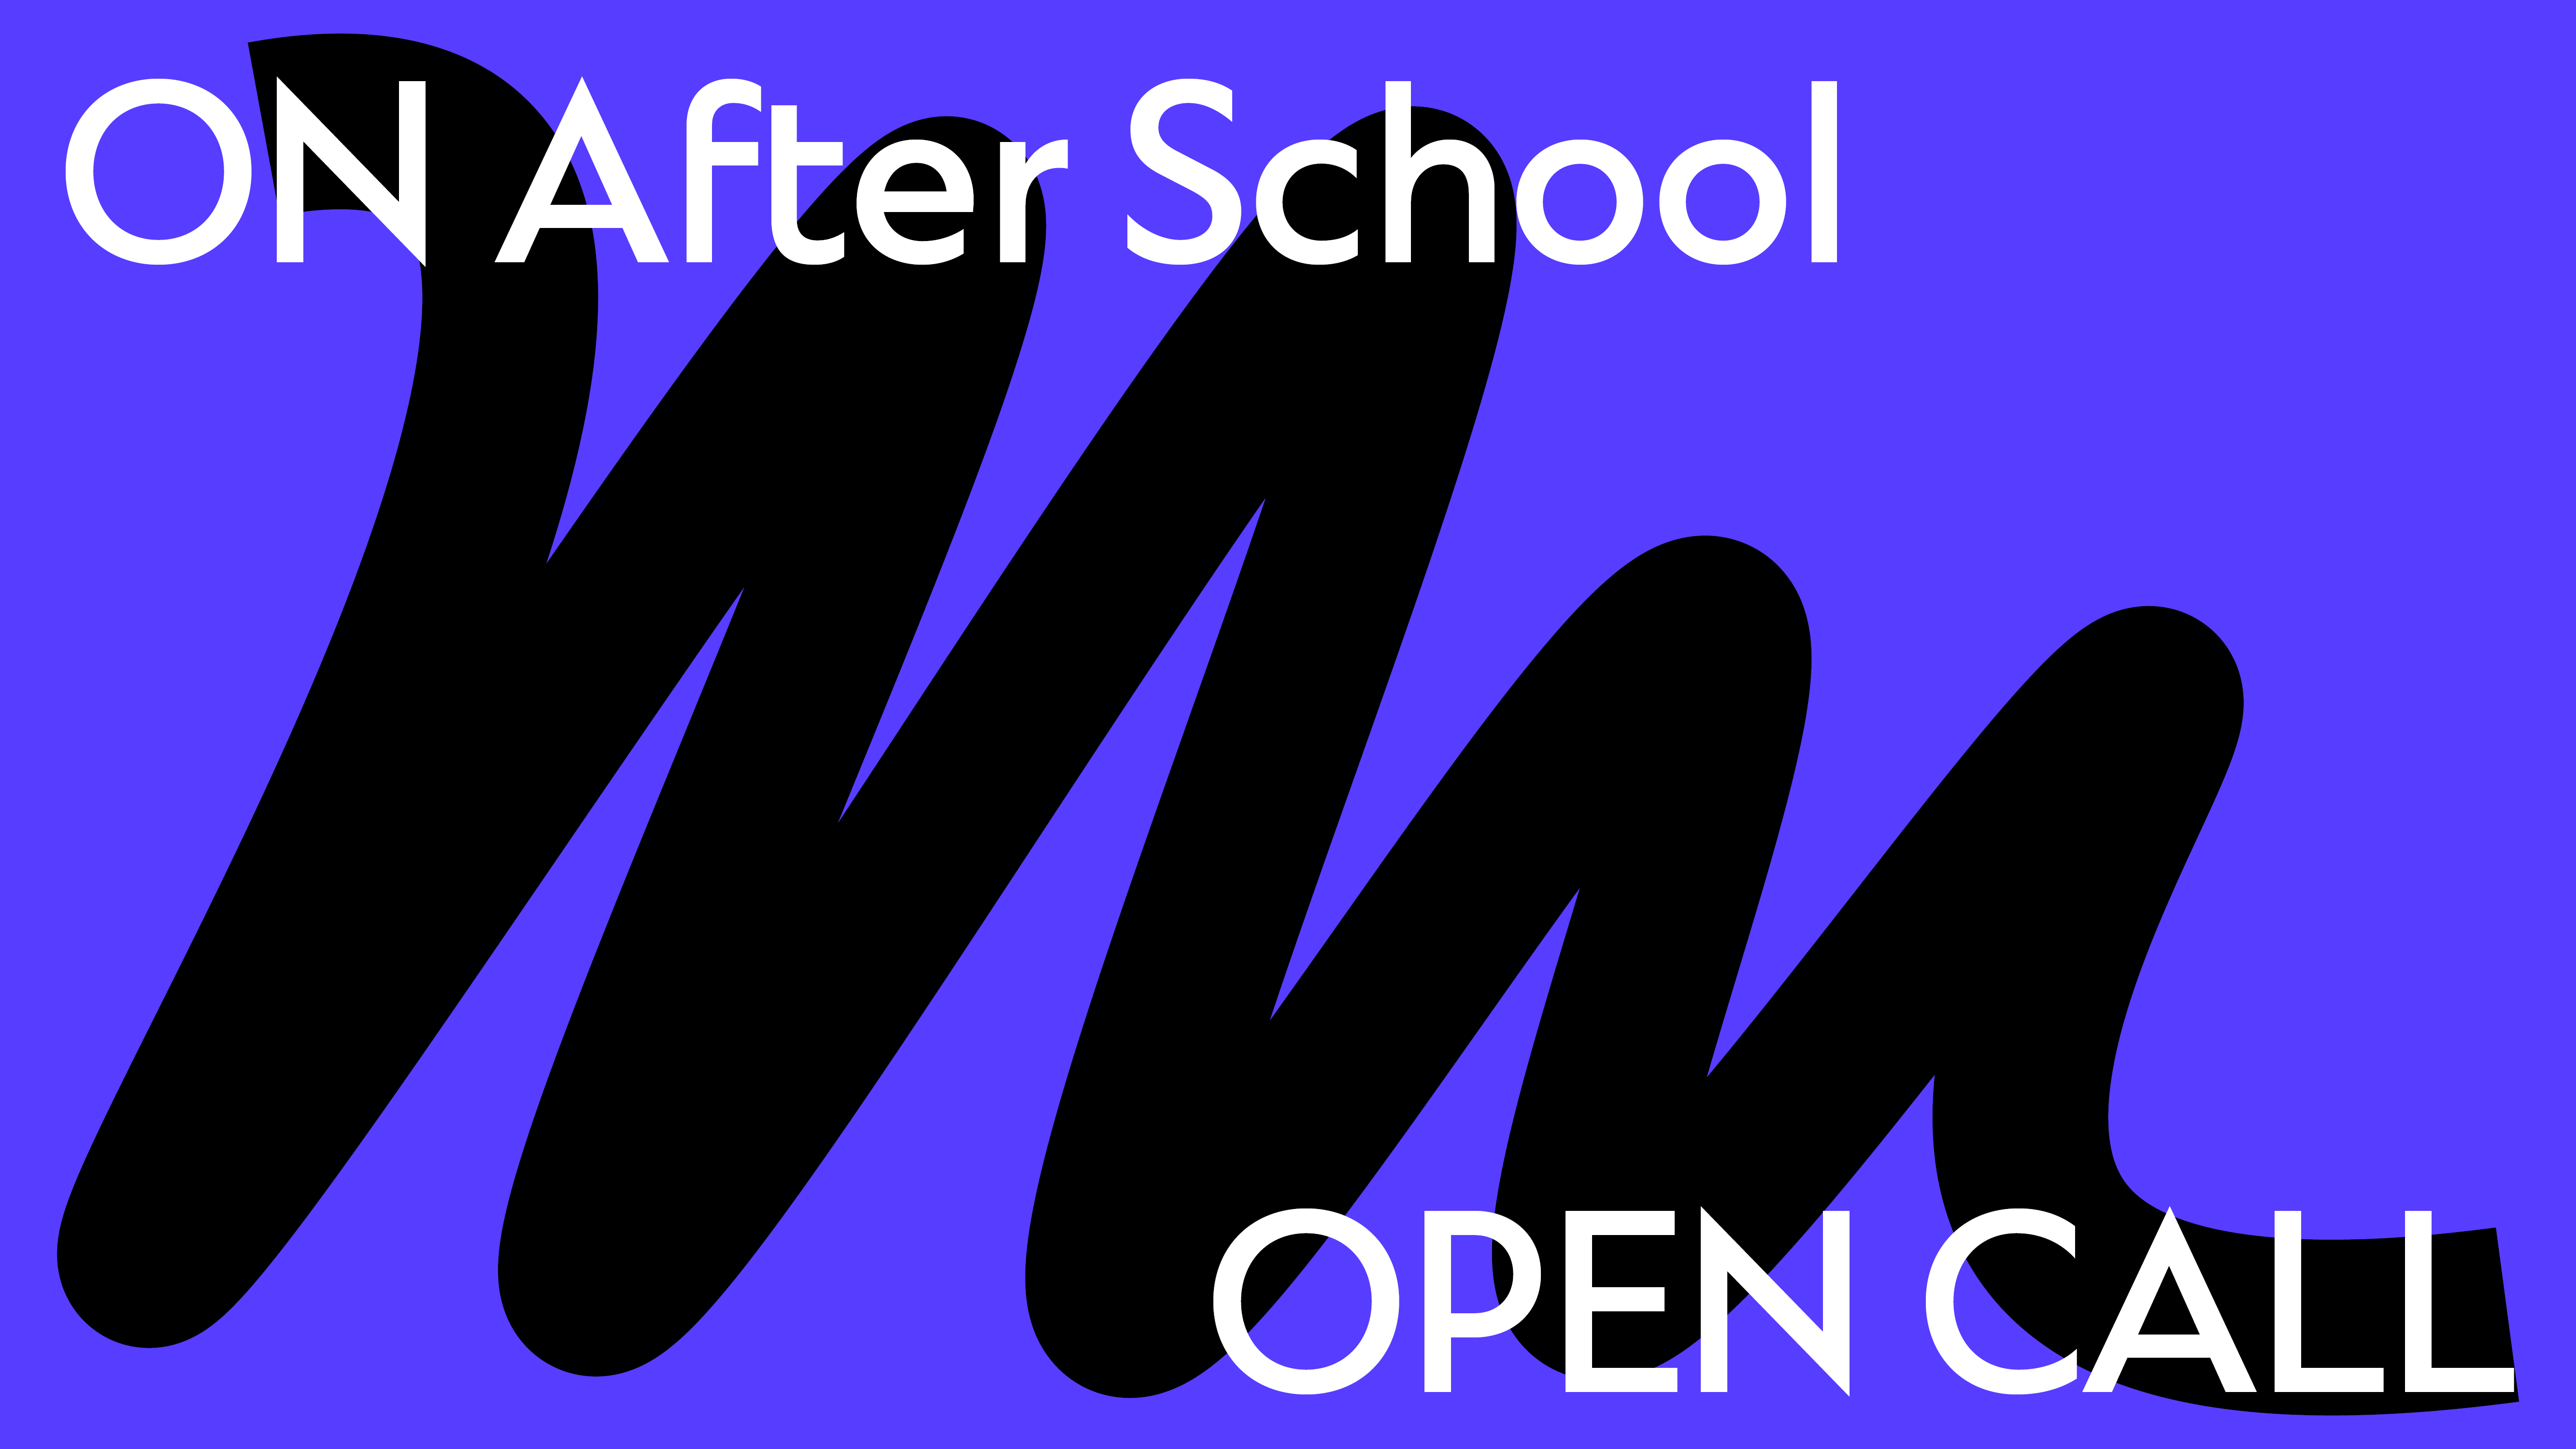 ON After School – Open Call